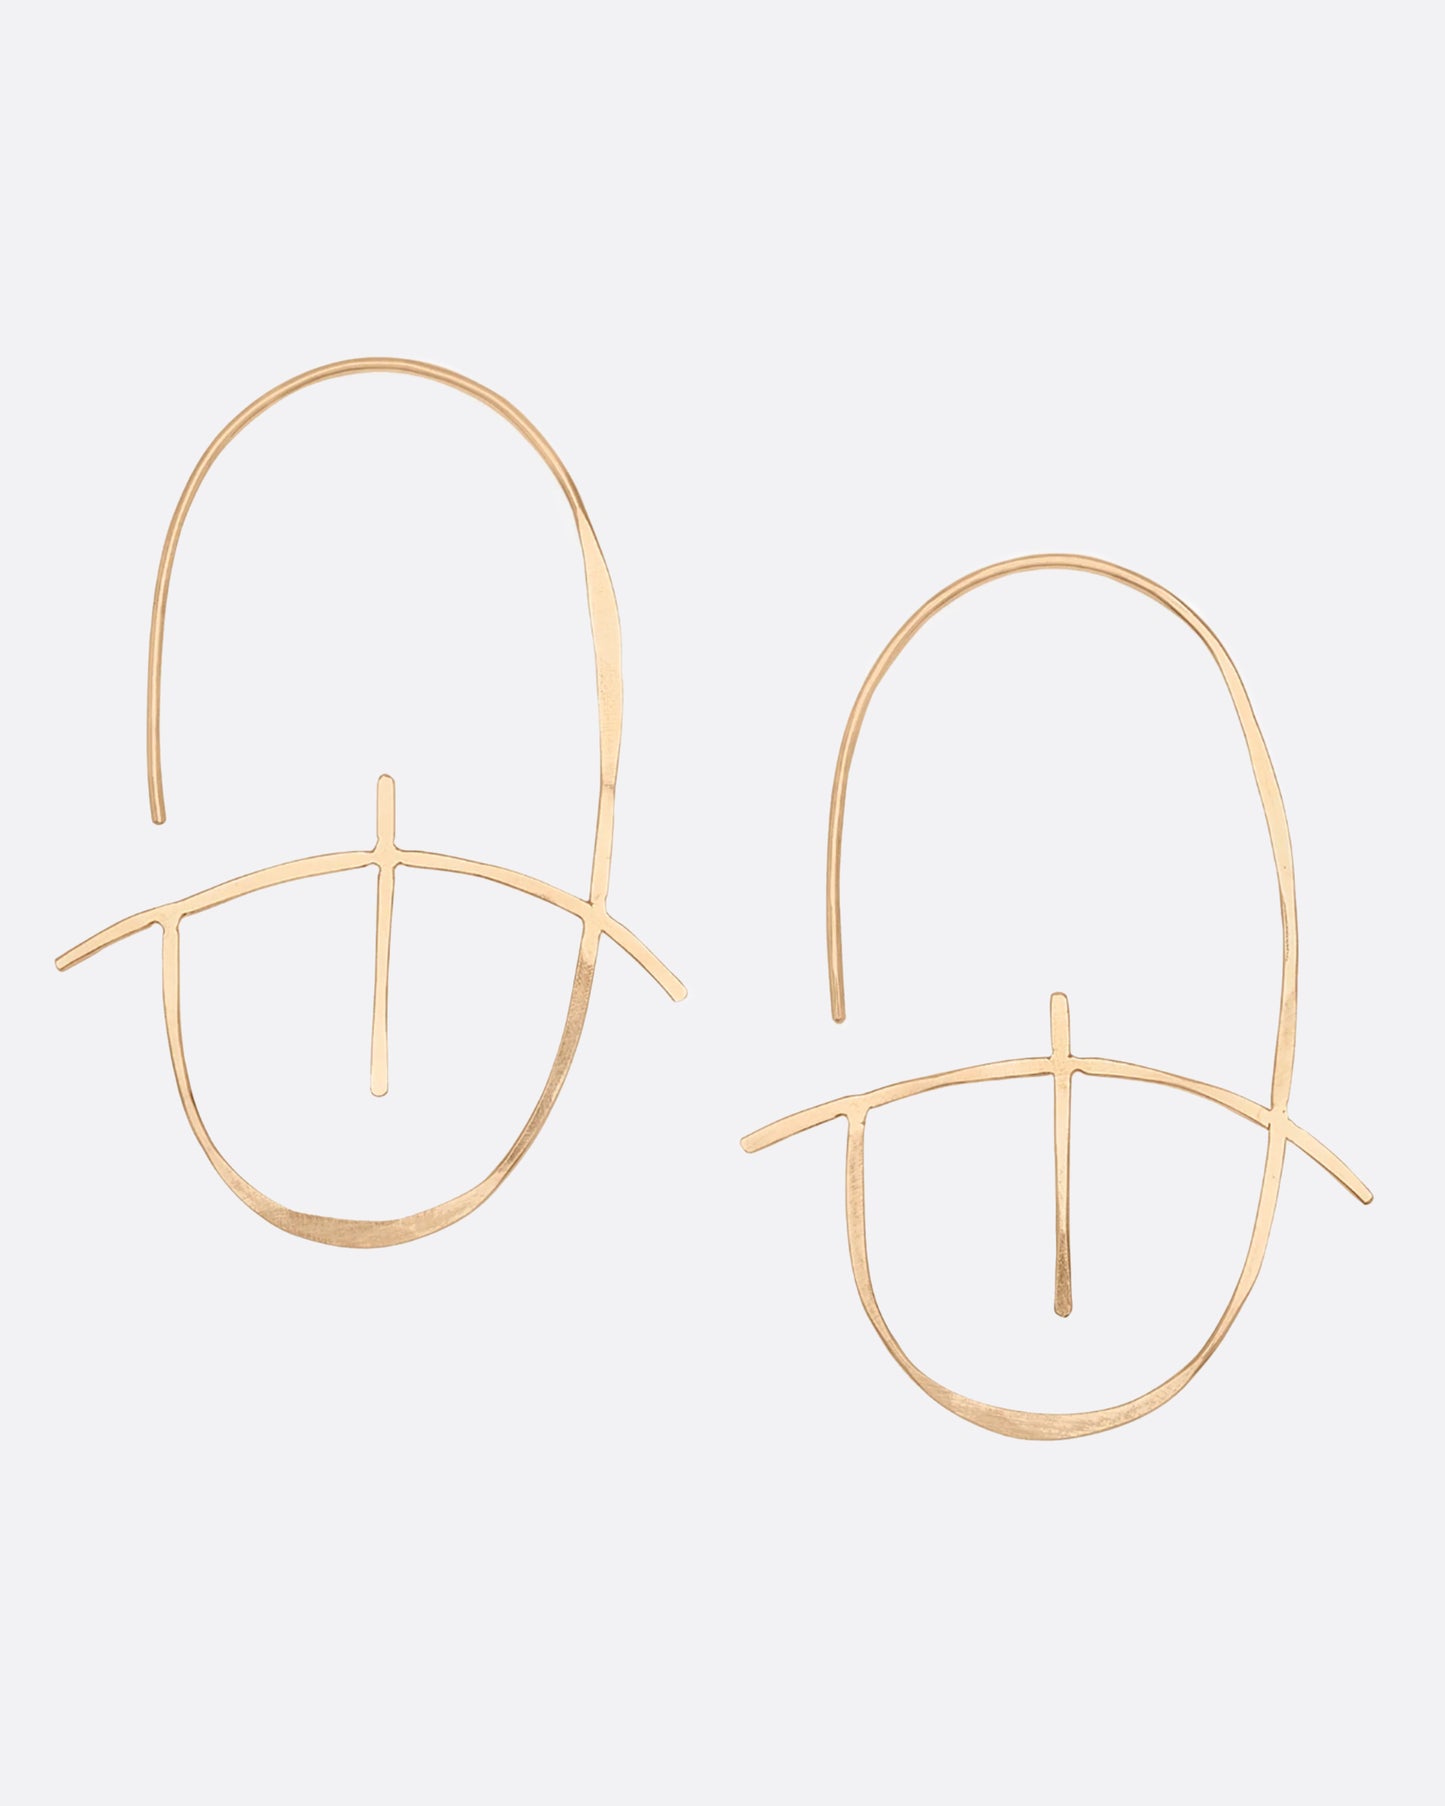 A geometric earring made of thin yellow gold with a hammered finish